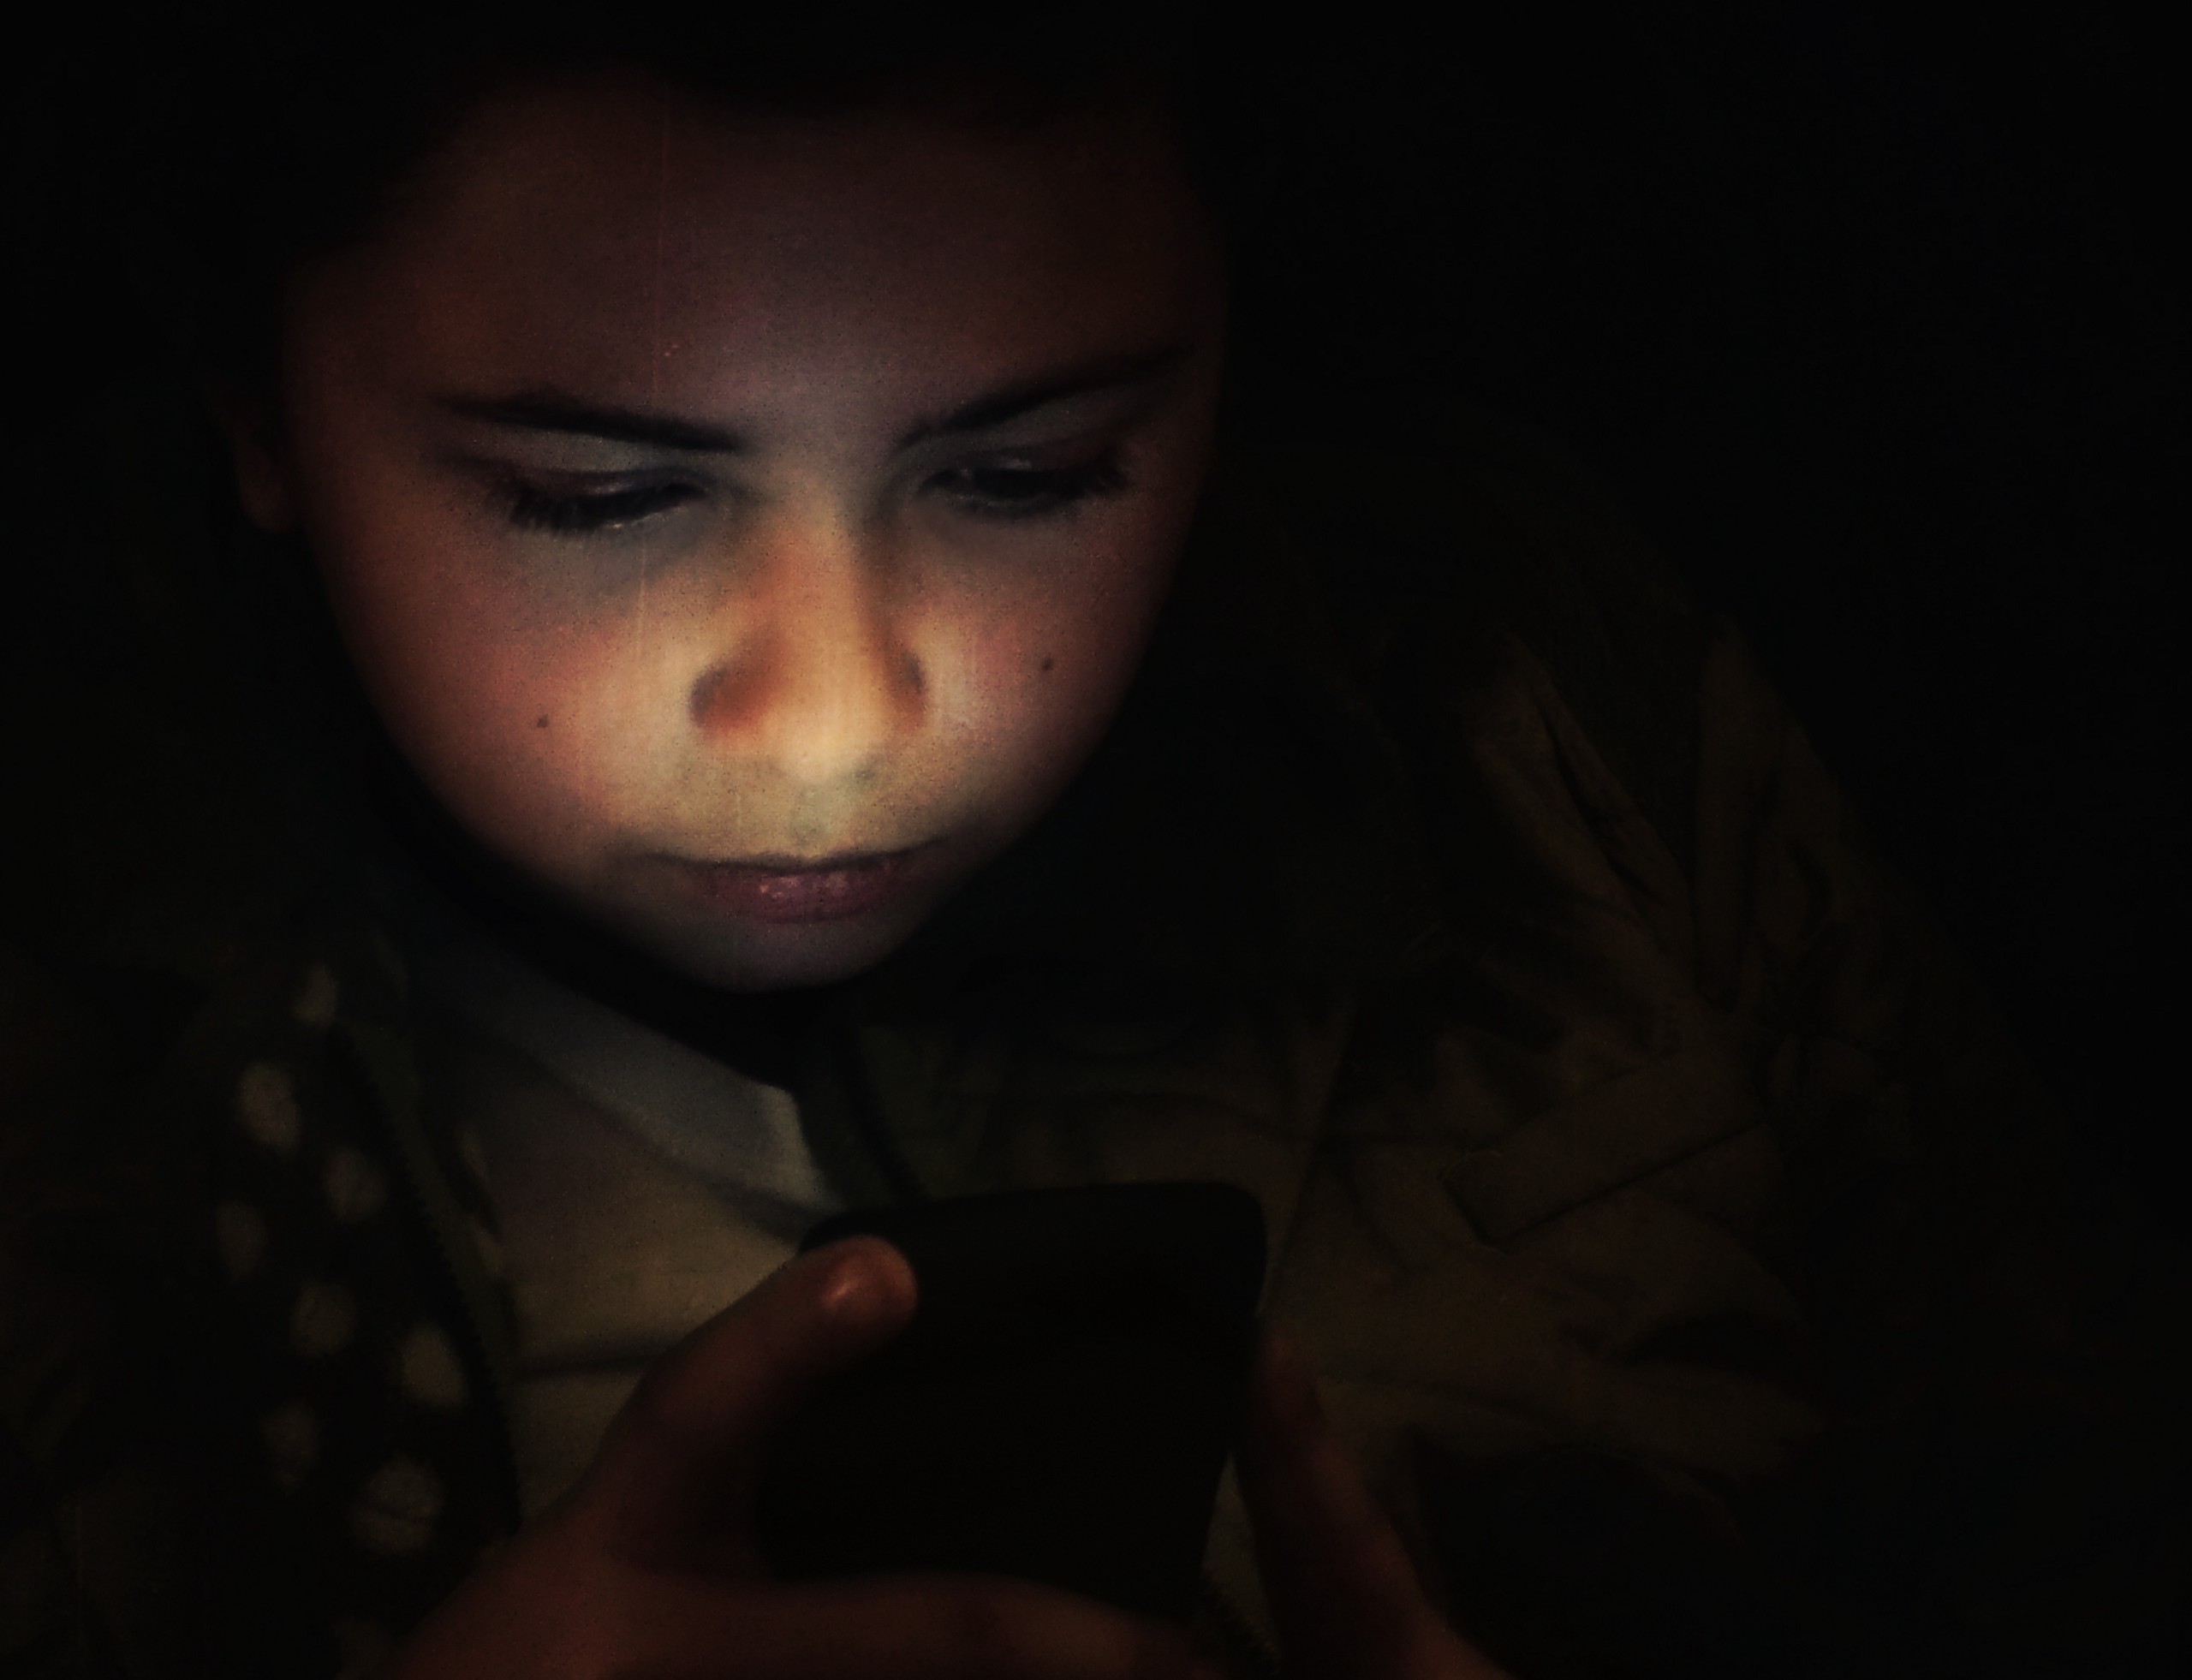 A girl plays on a smartphone.